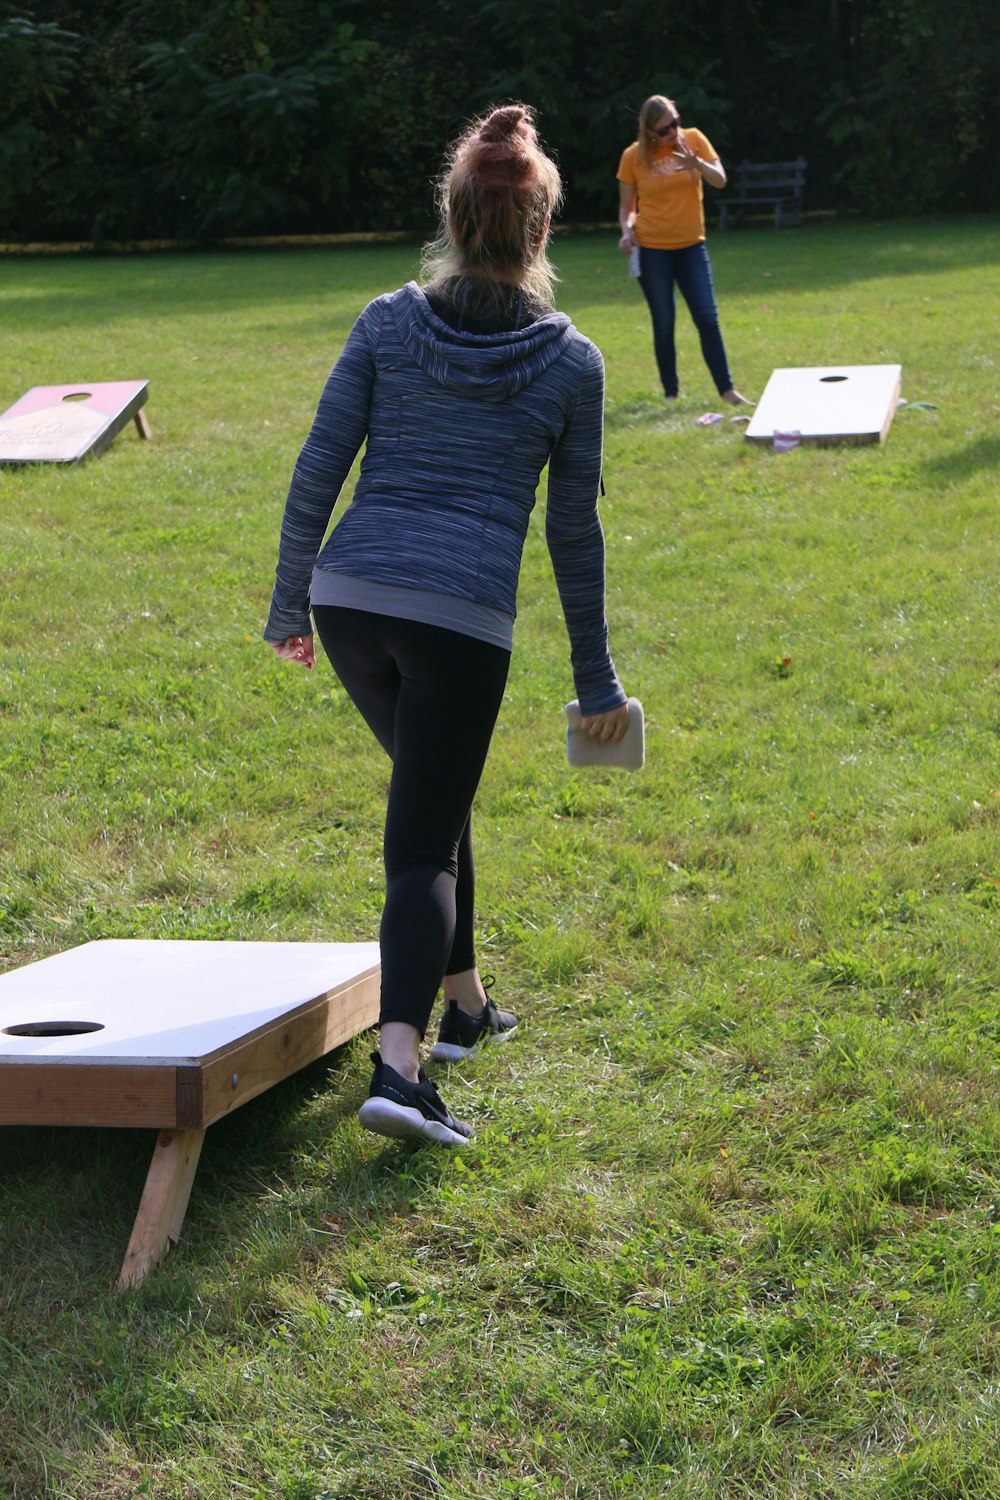 two women playing a game of bean bag toss